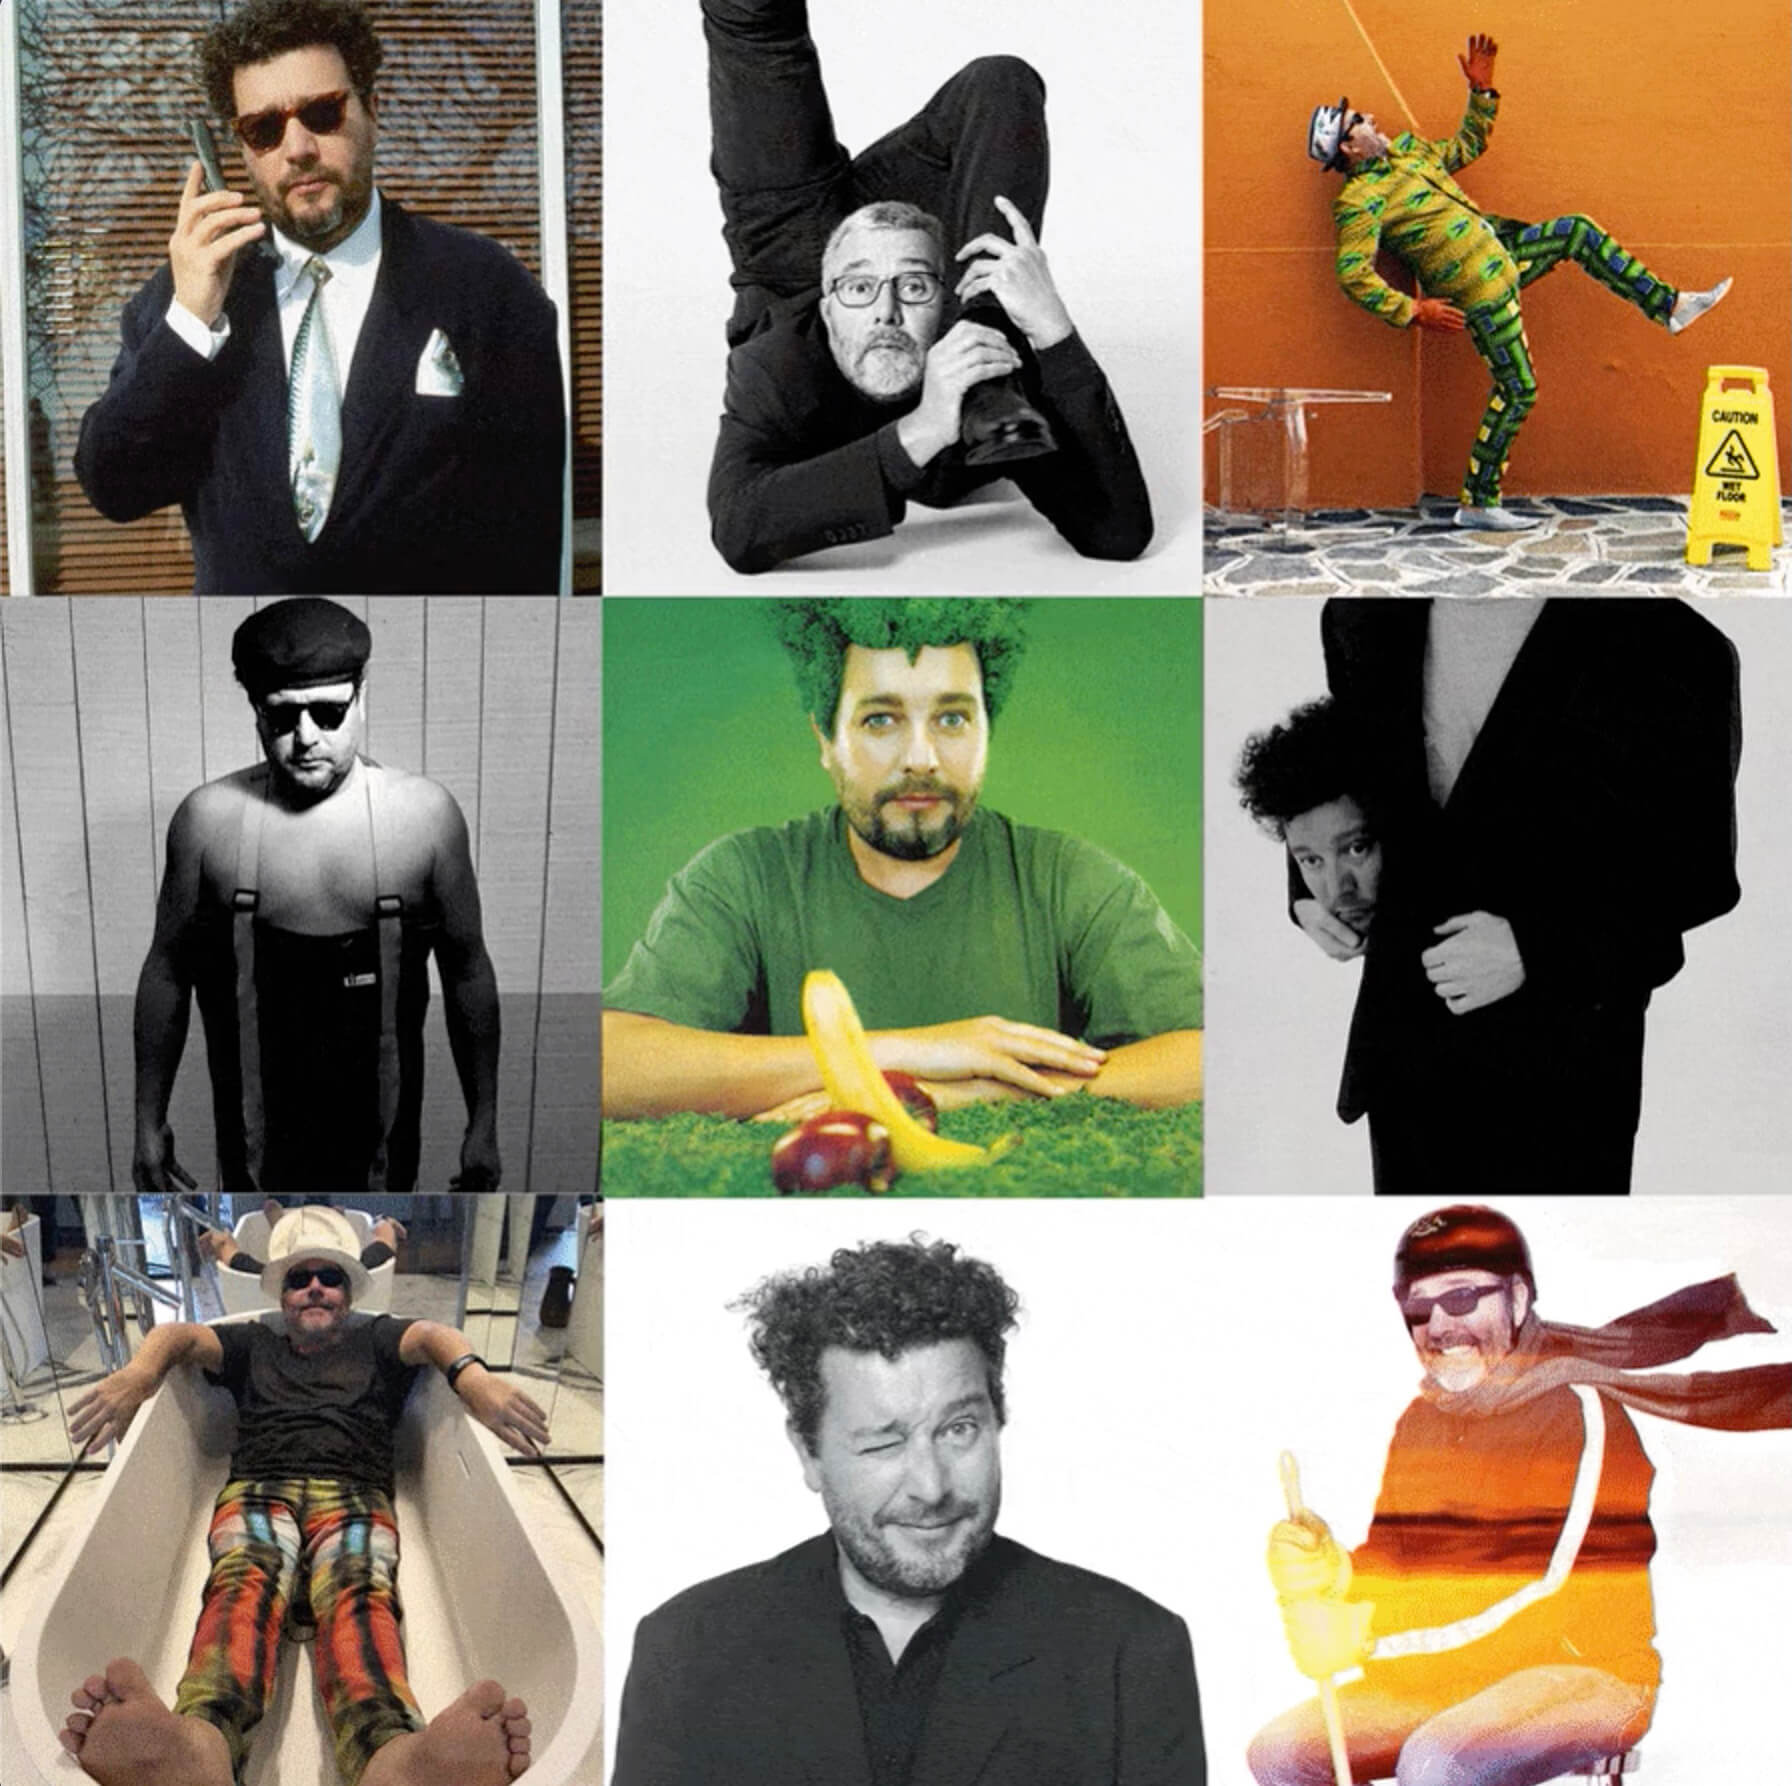 INTERVIEW - Philippe Starck on humor